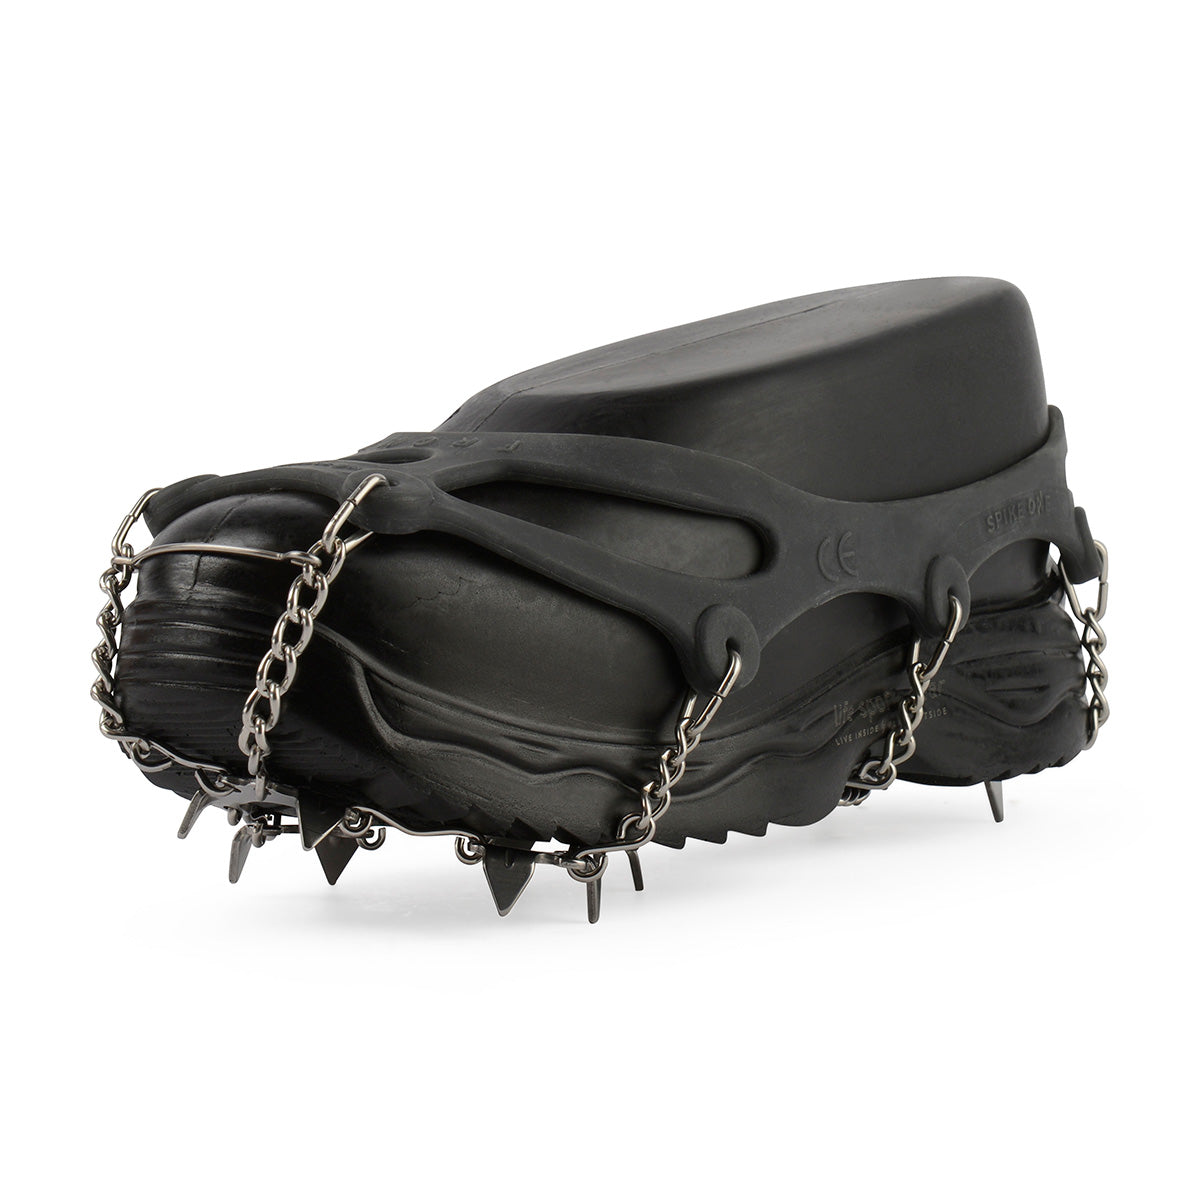 LSG Spike One Ice Cleats